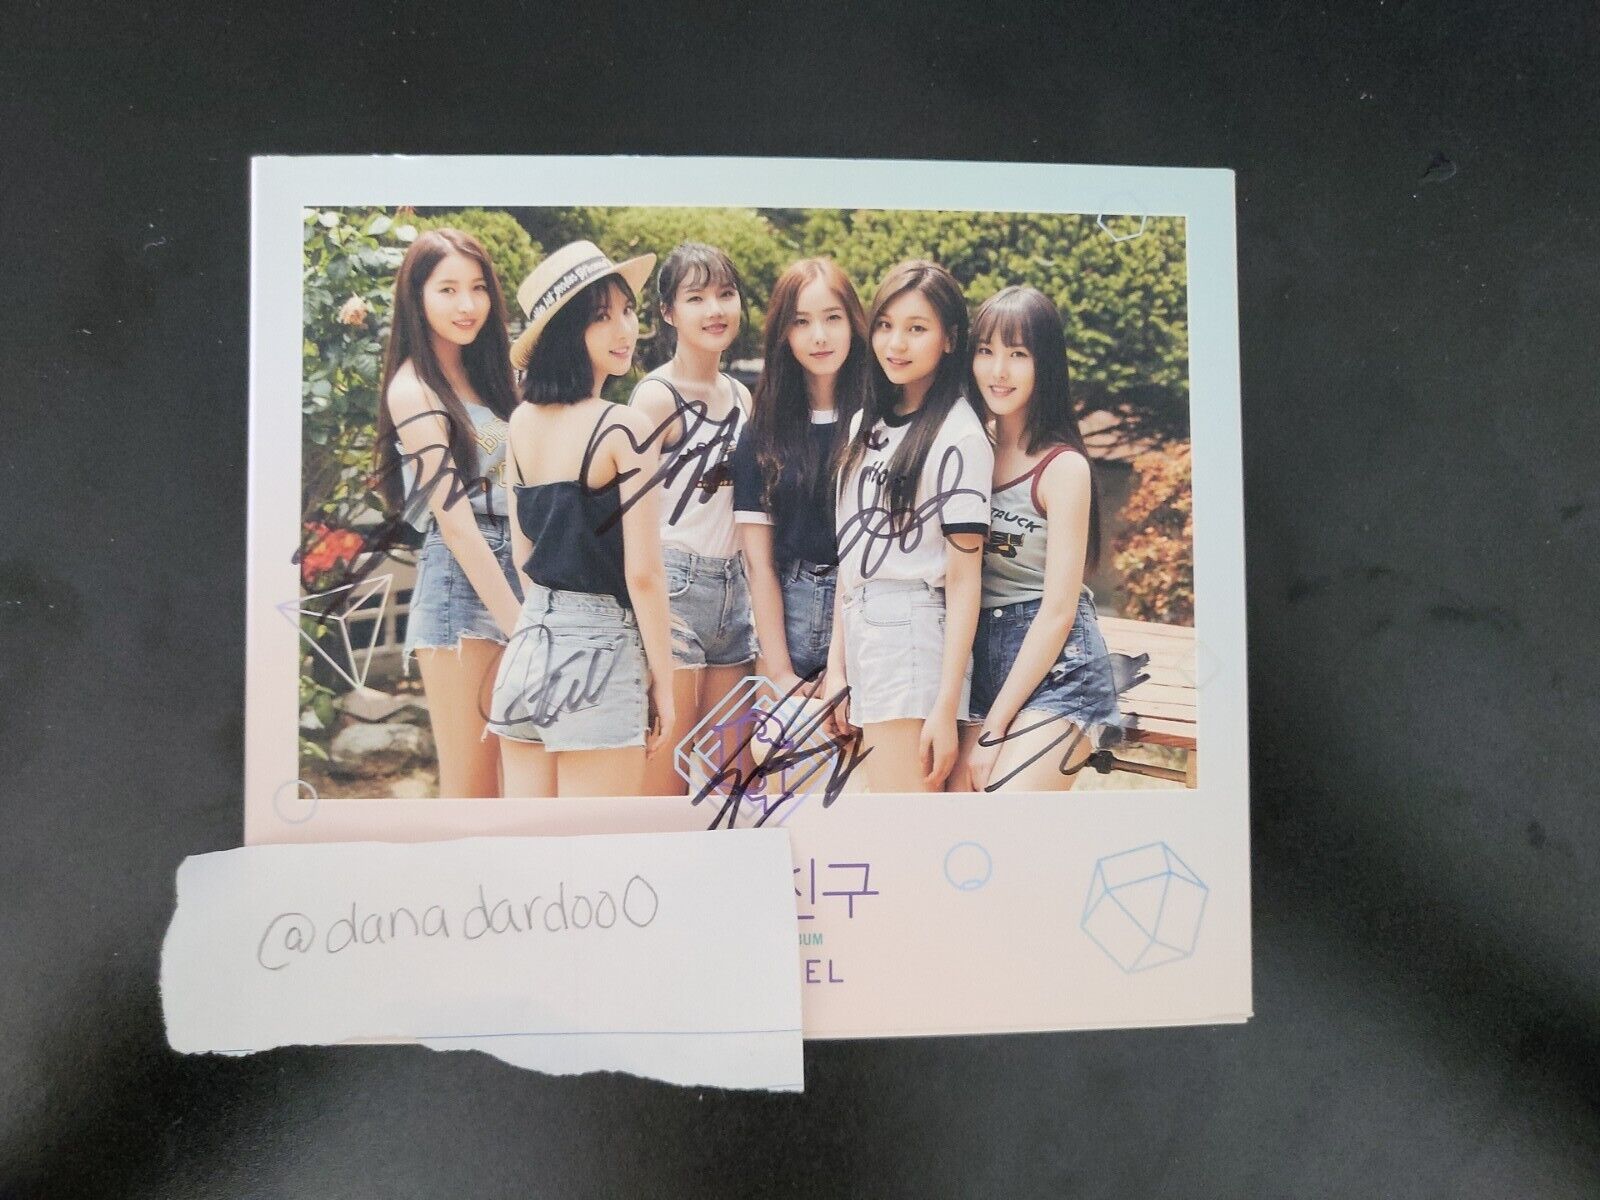 [Mwave] Gfriend Parallel: Love Version CD Signed By All Members